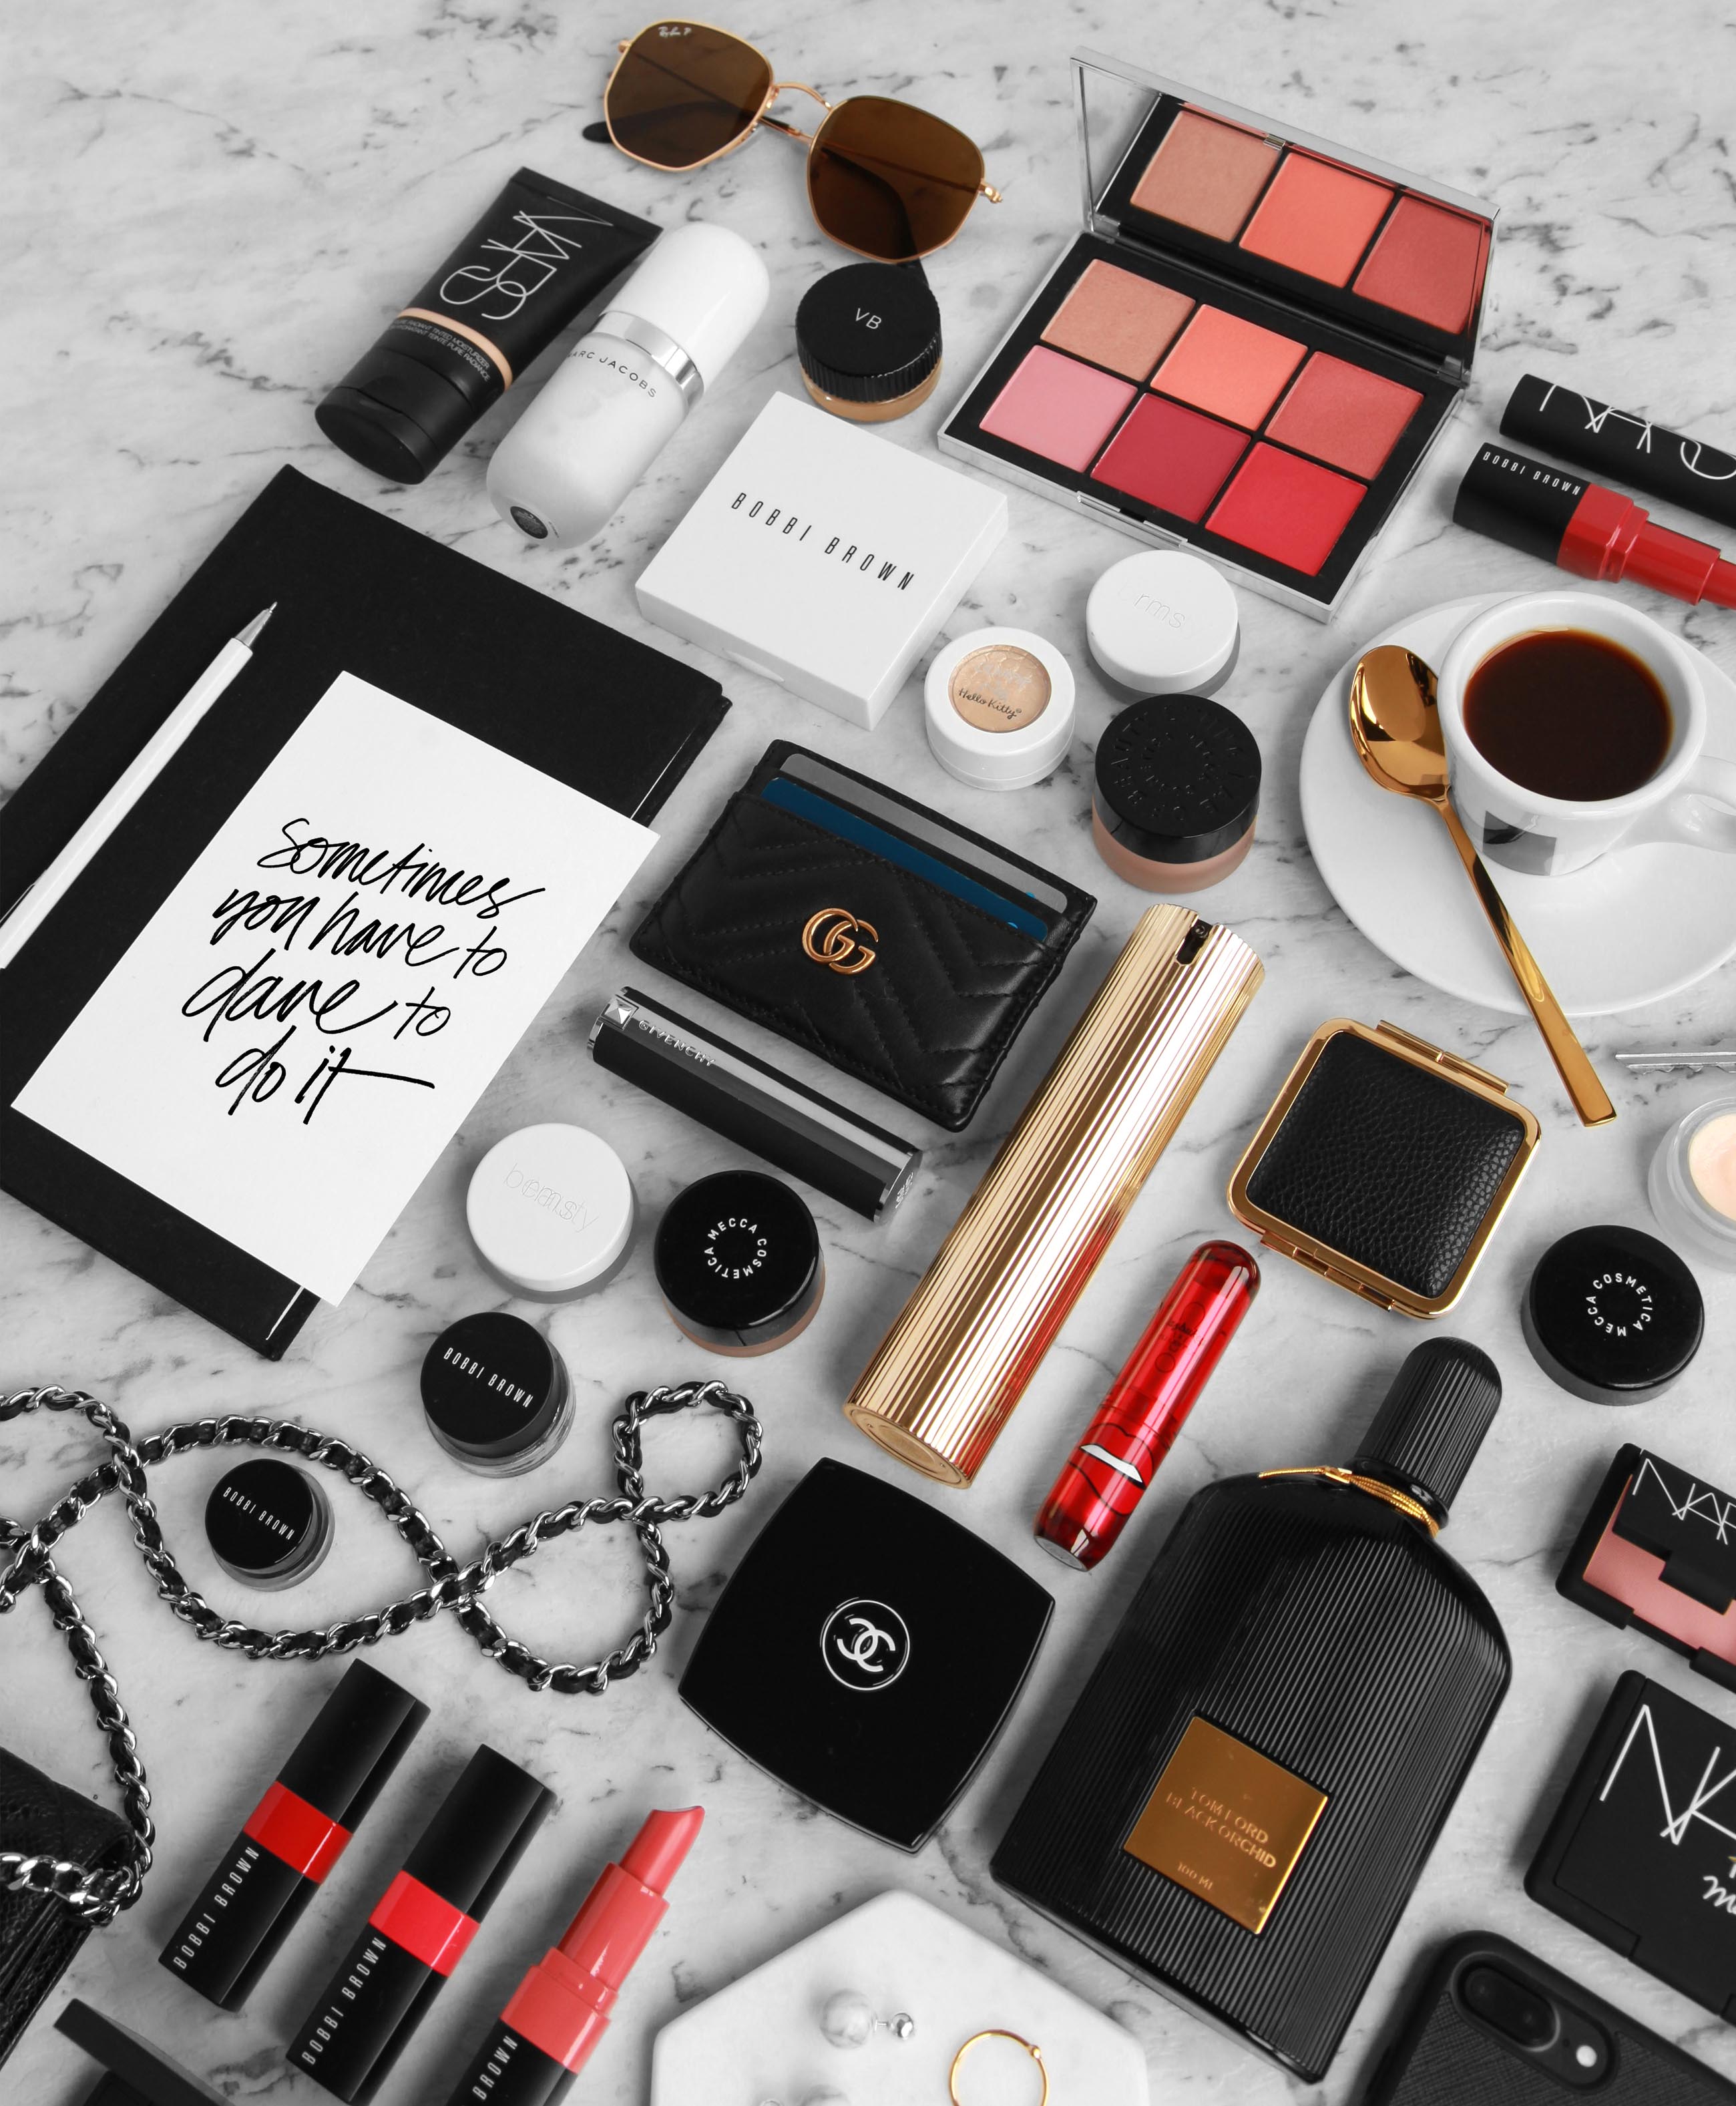 How to construct a flatlay - design by aikonik 1